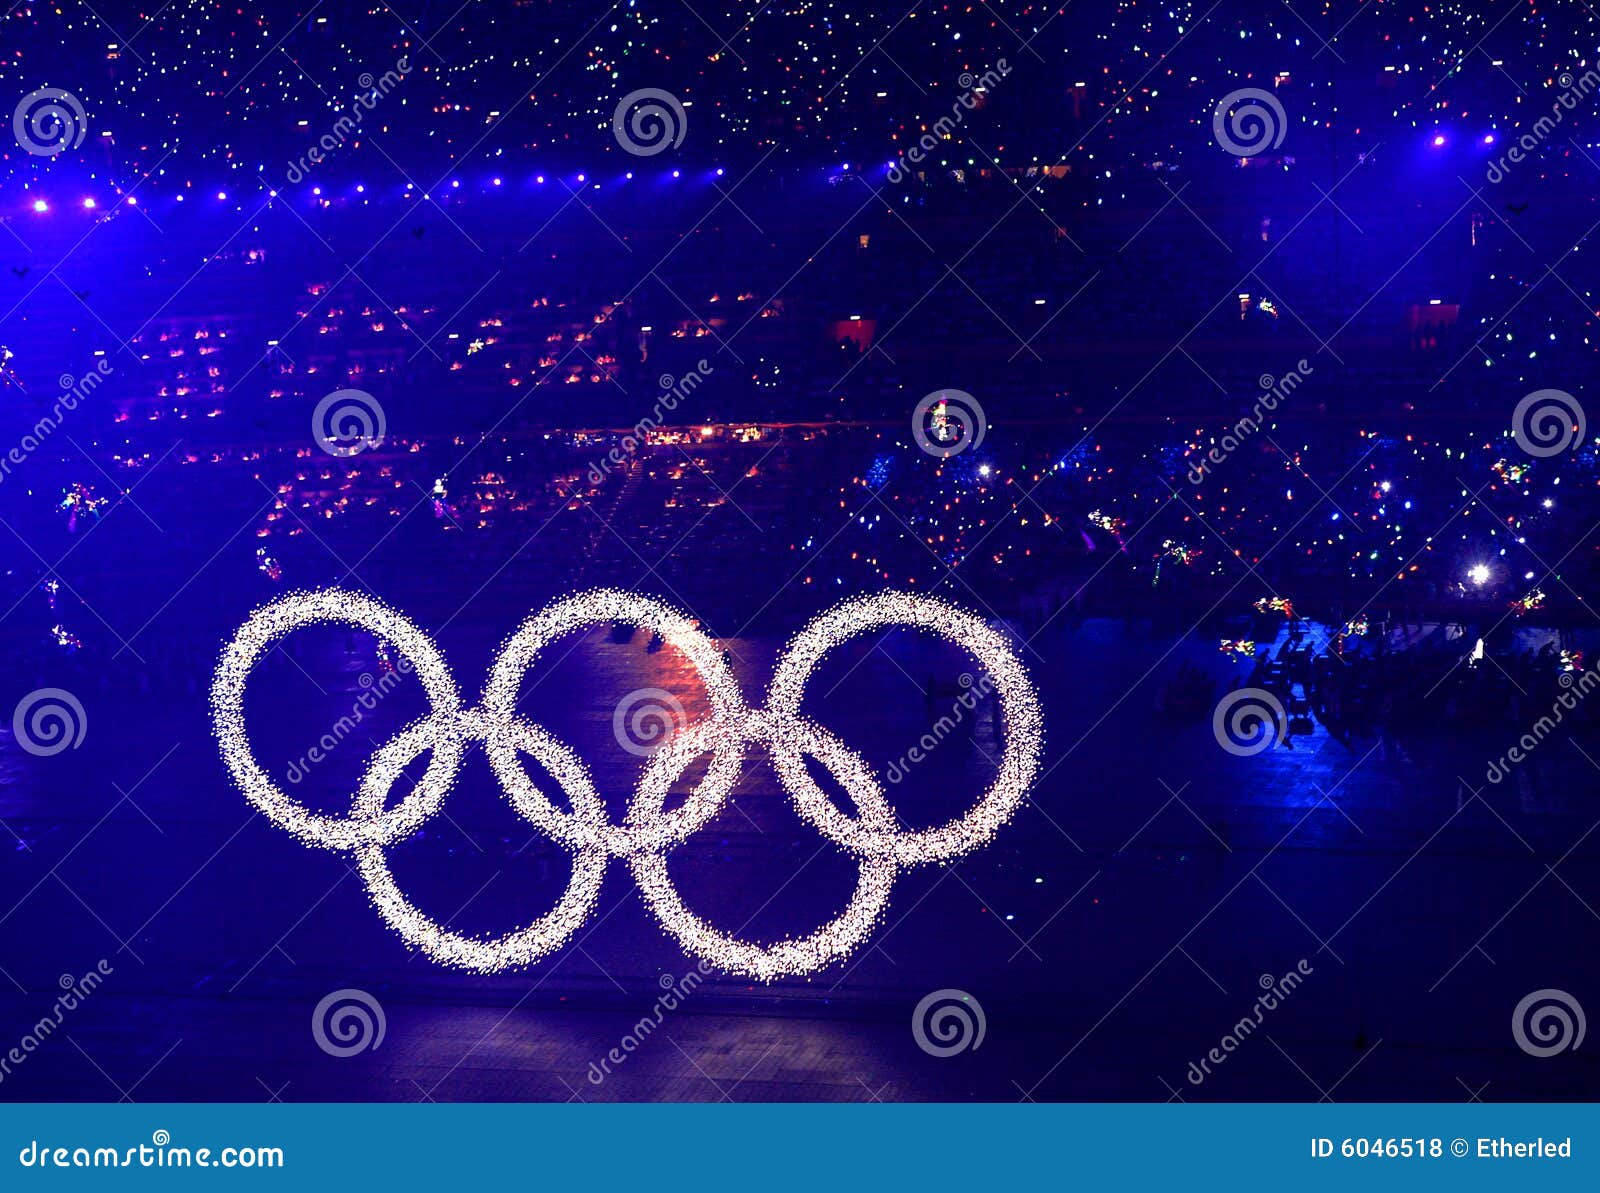 Olympics Opening Ceremony Offers Fanfare for a Reinvented Russia - The New  York Times